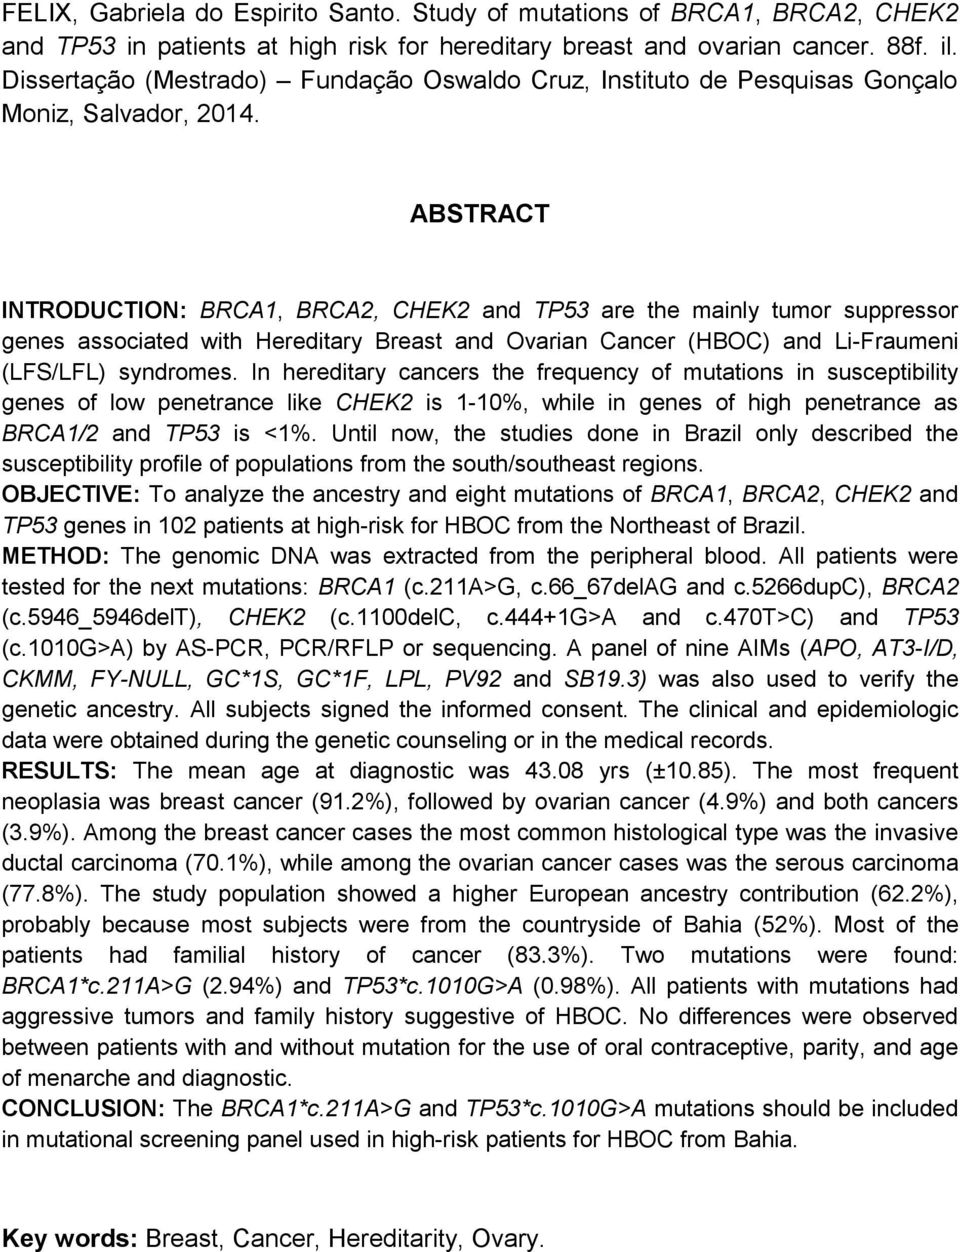 ABSTRACT INTRODUCTION: BRCA1, BRCA2, CHEK2 and TP53 are the mainly tumor suppressor genes associated with Hereditary Breast and Ovarian Cancer (HBOC) and Li-Fraumeni (LFS/LFL) syndromes.